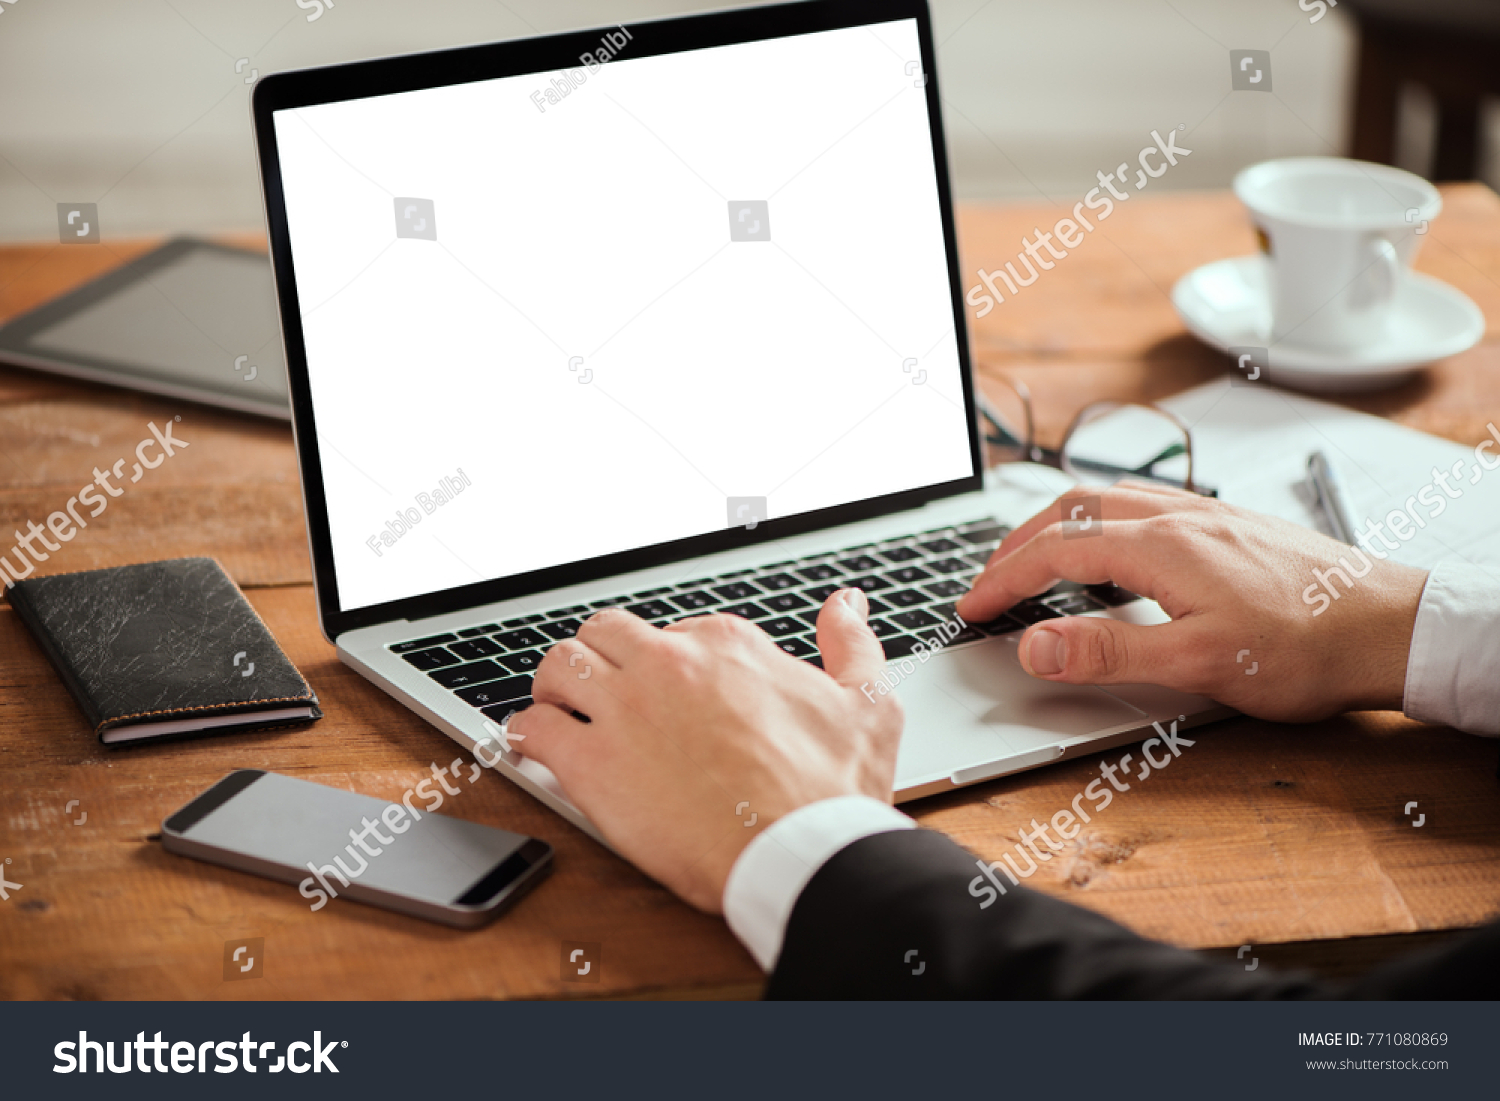 Business man hands typing on laptop pc #771080869